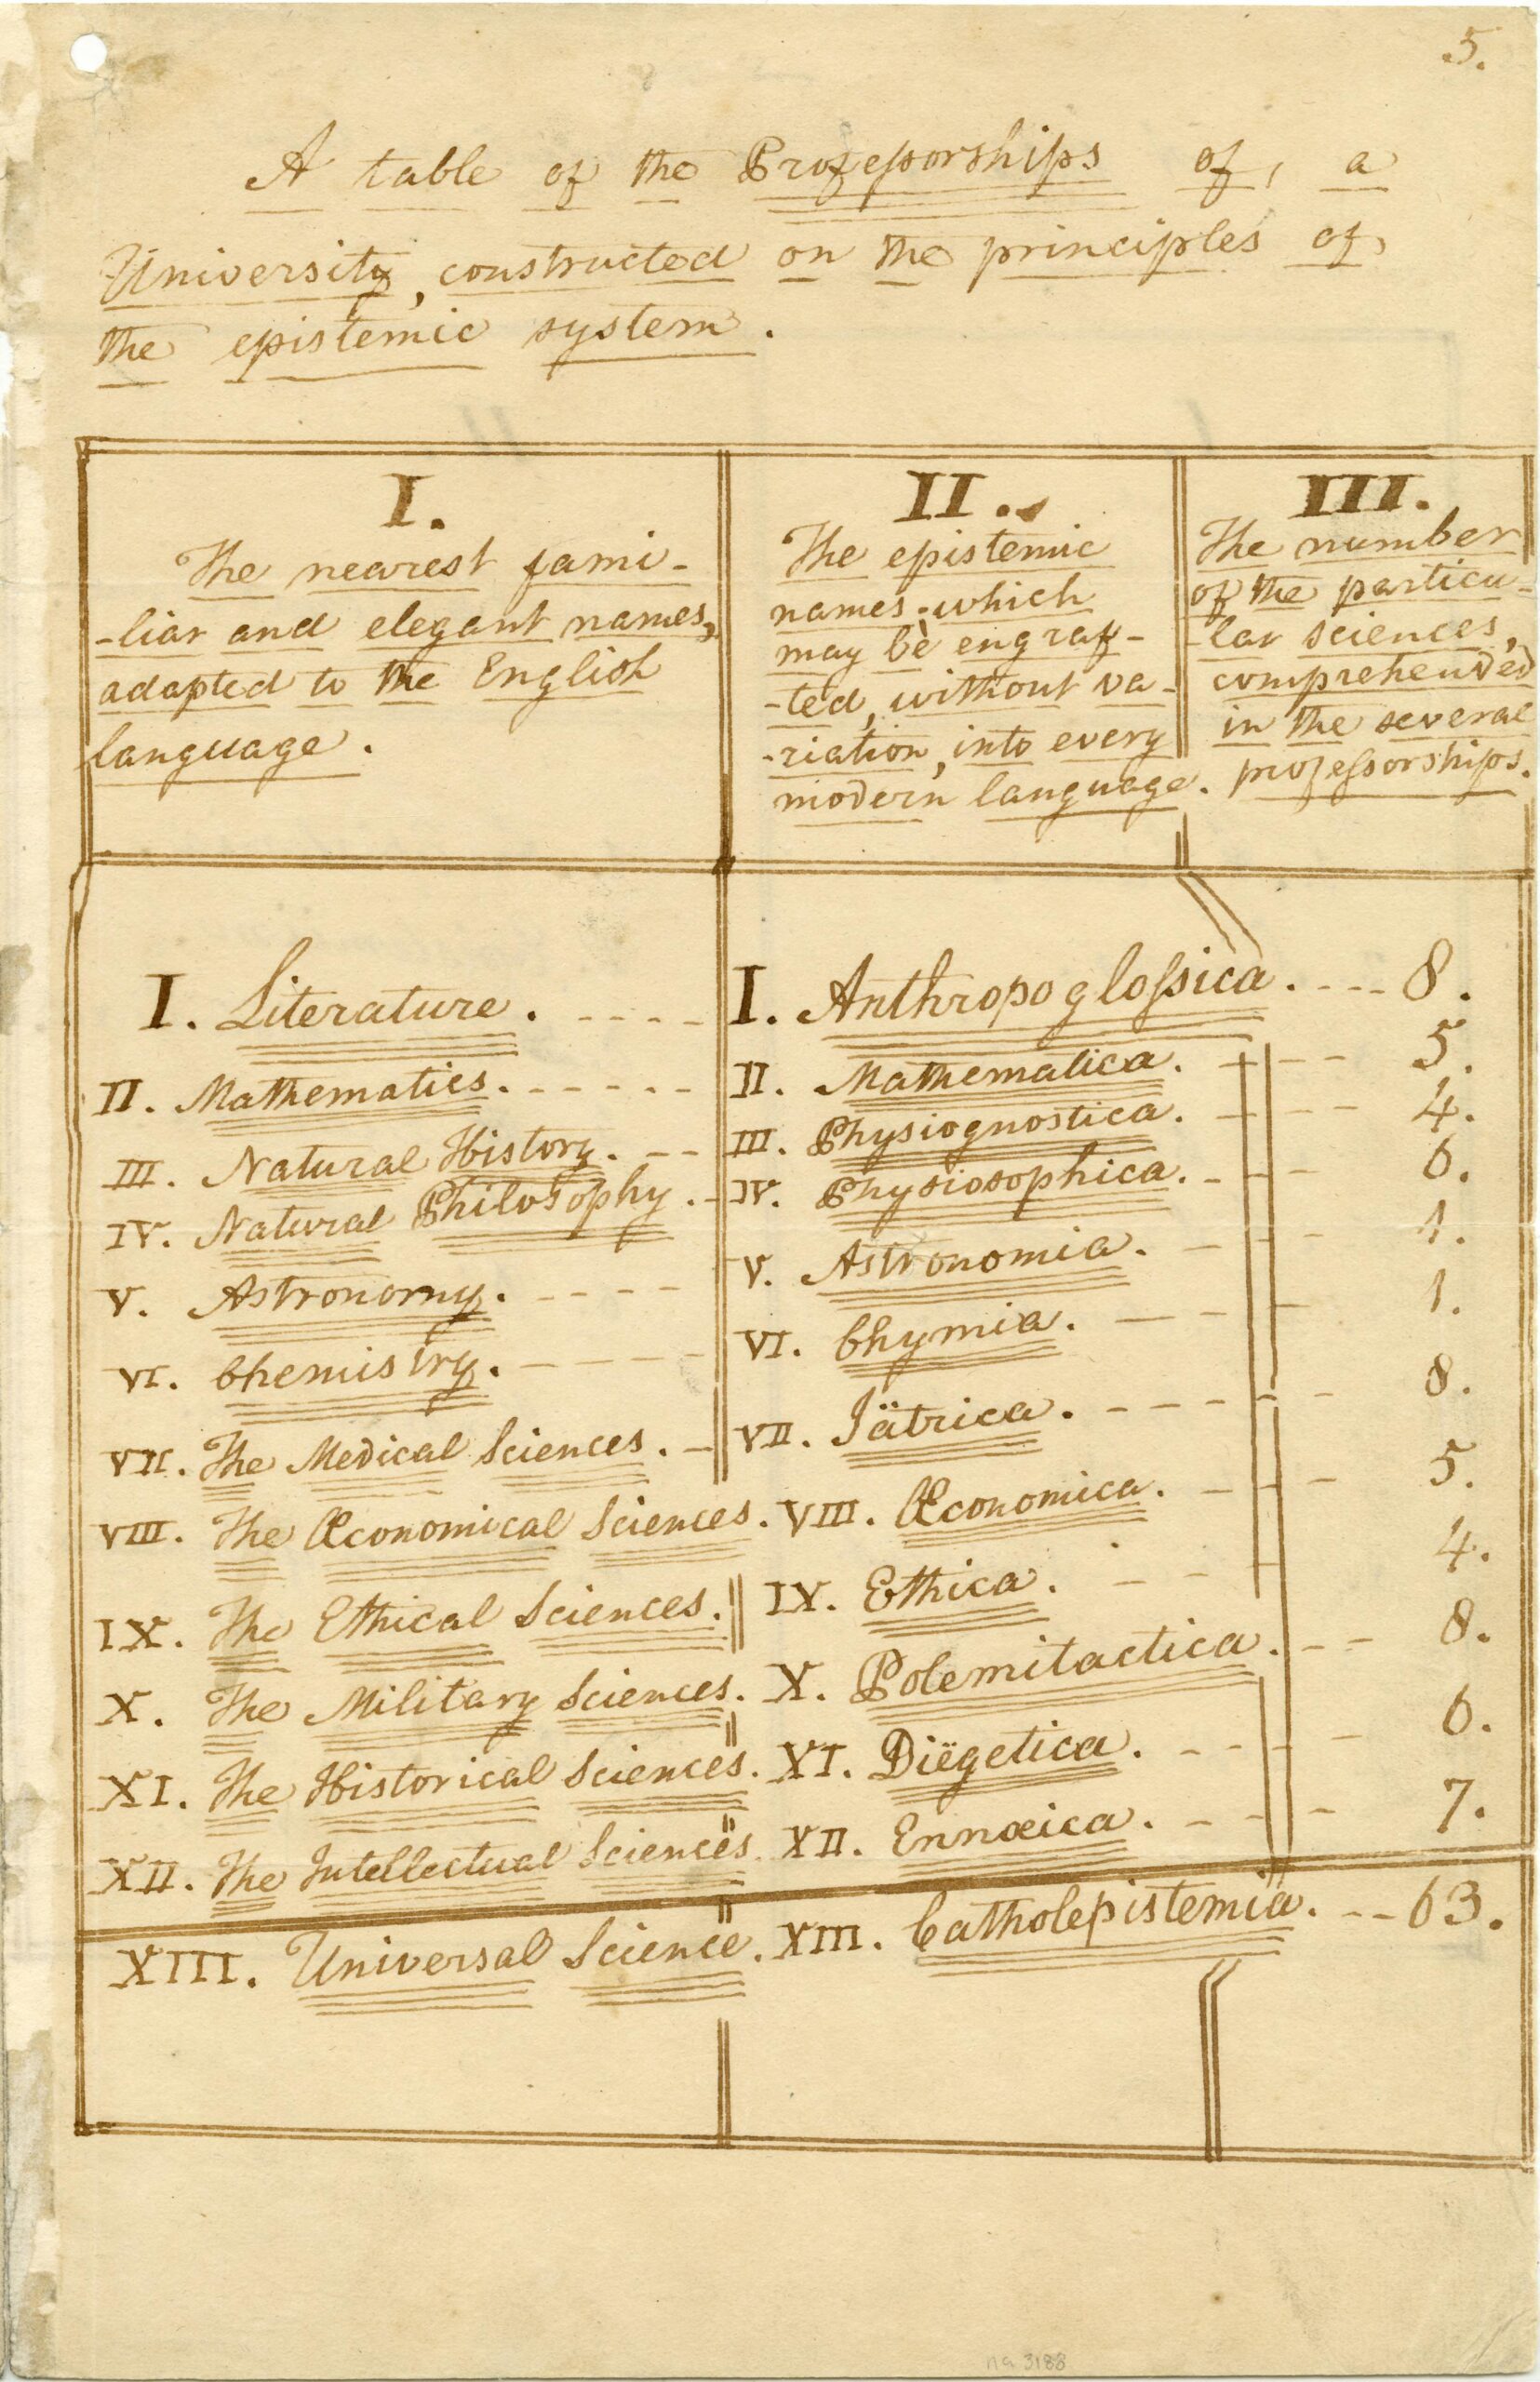 Handwritten table listing and describing proposed University professorships.